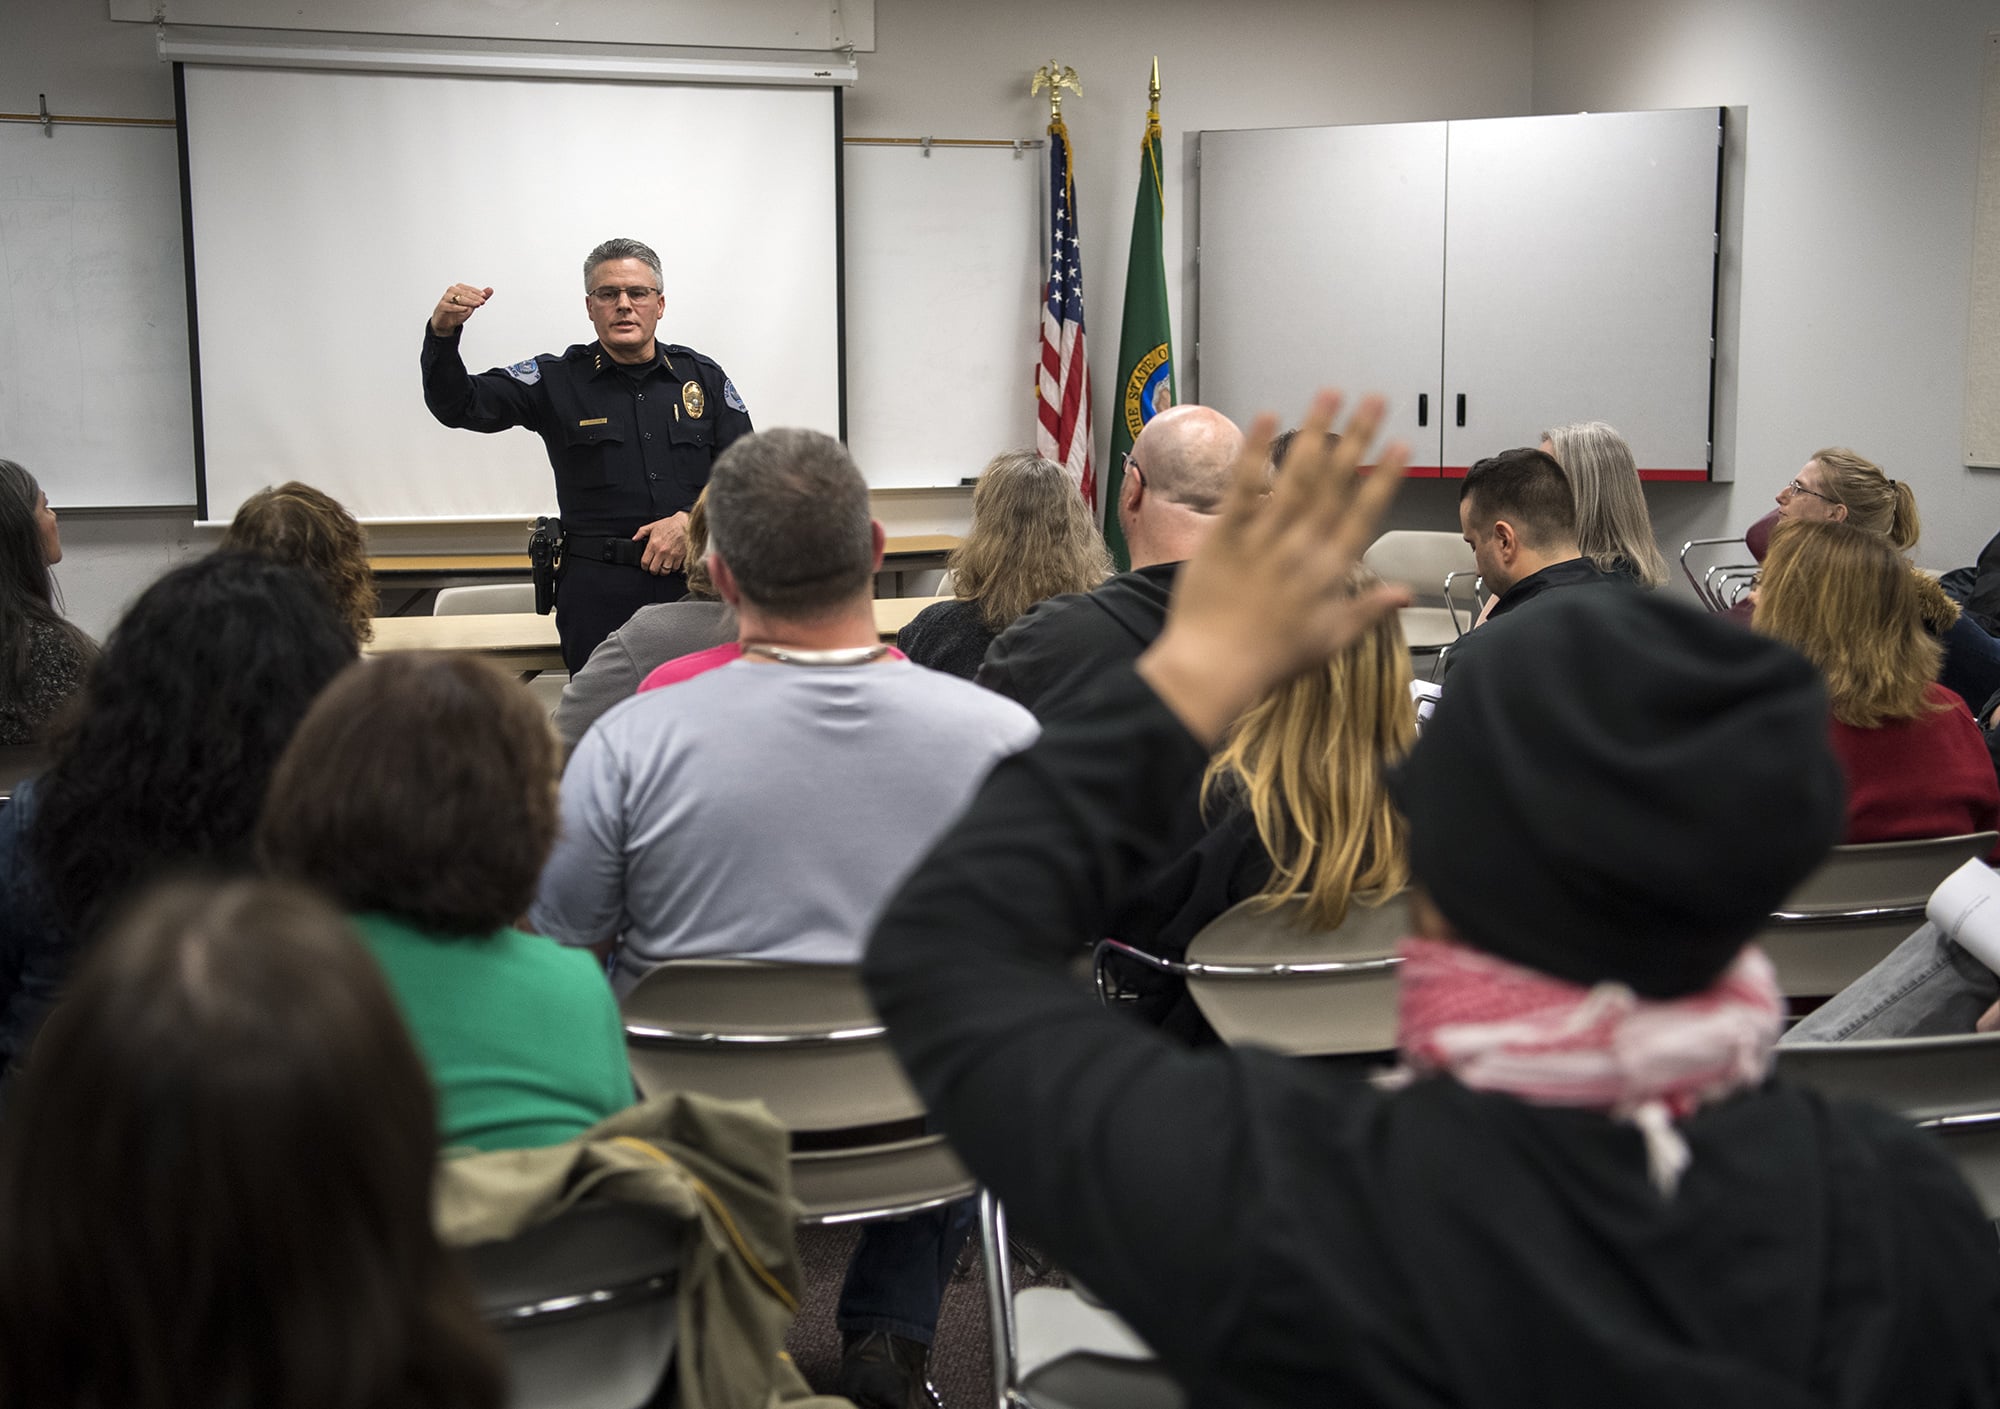 Vancouver Police Chief James McElvain speaks about recent officer-involved shootings during a Vancouver Neighborhood Alliance meeting Wednesday night at Fisher's Landing Fire Station 9.